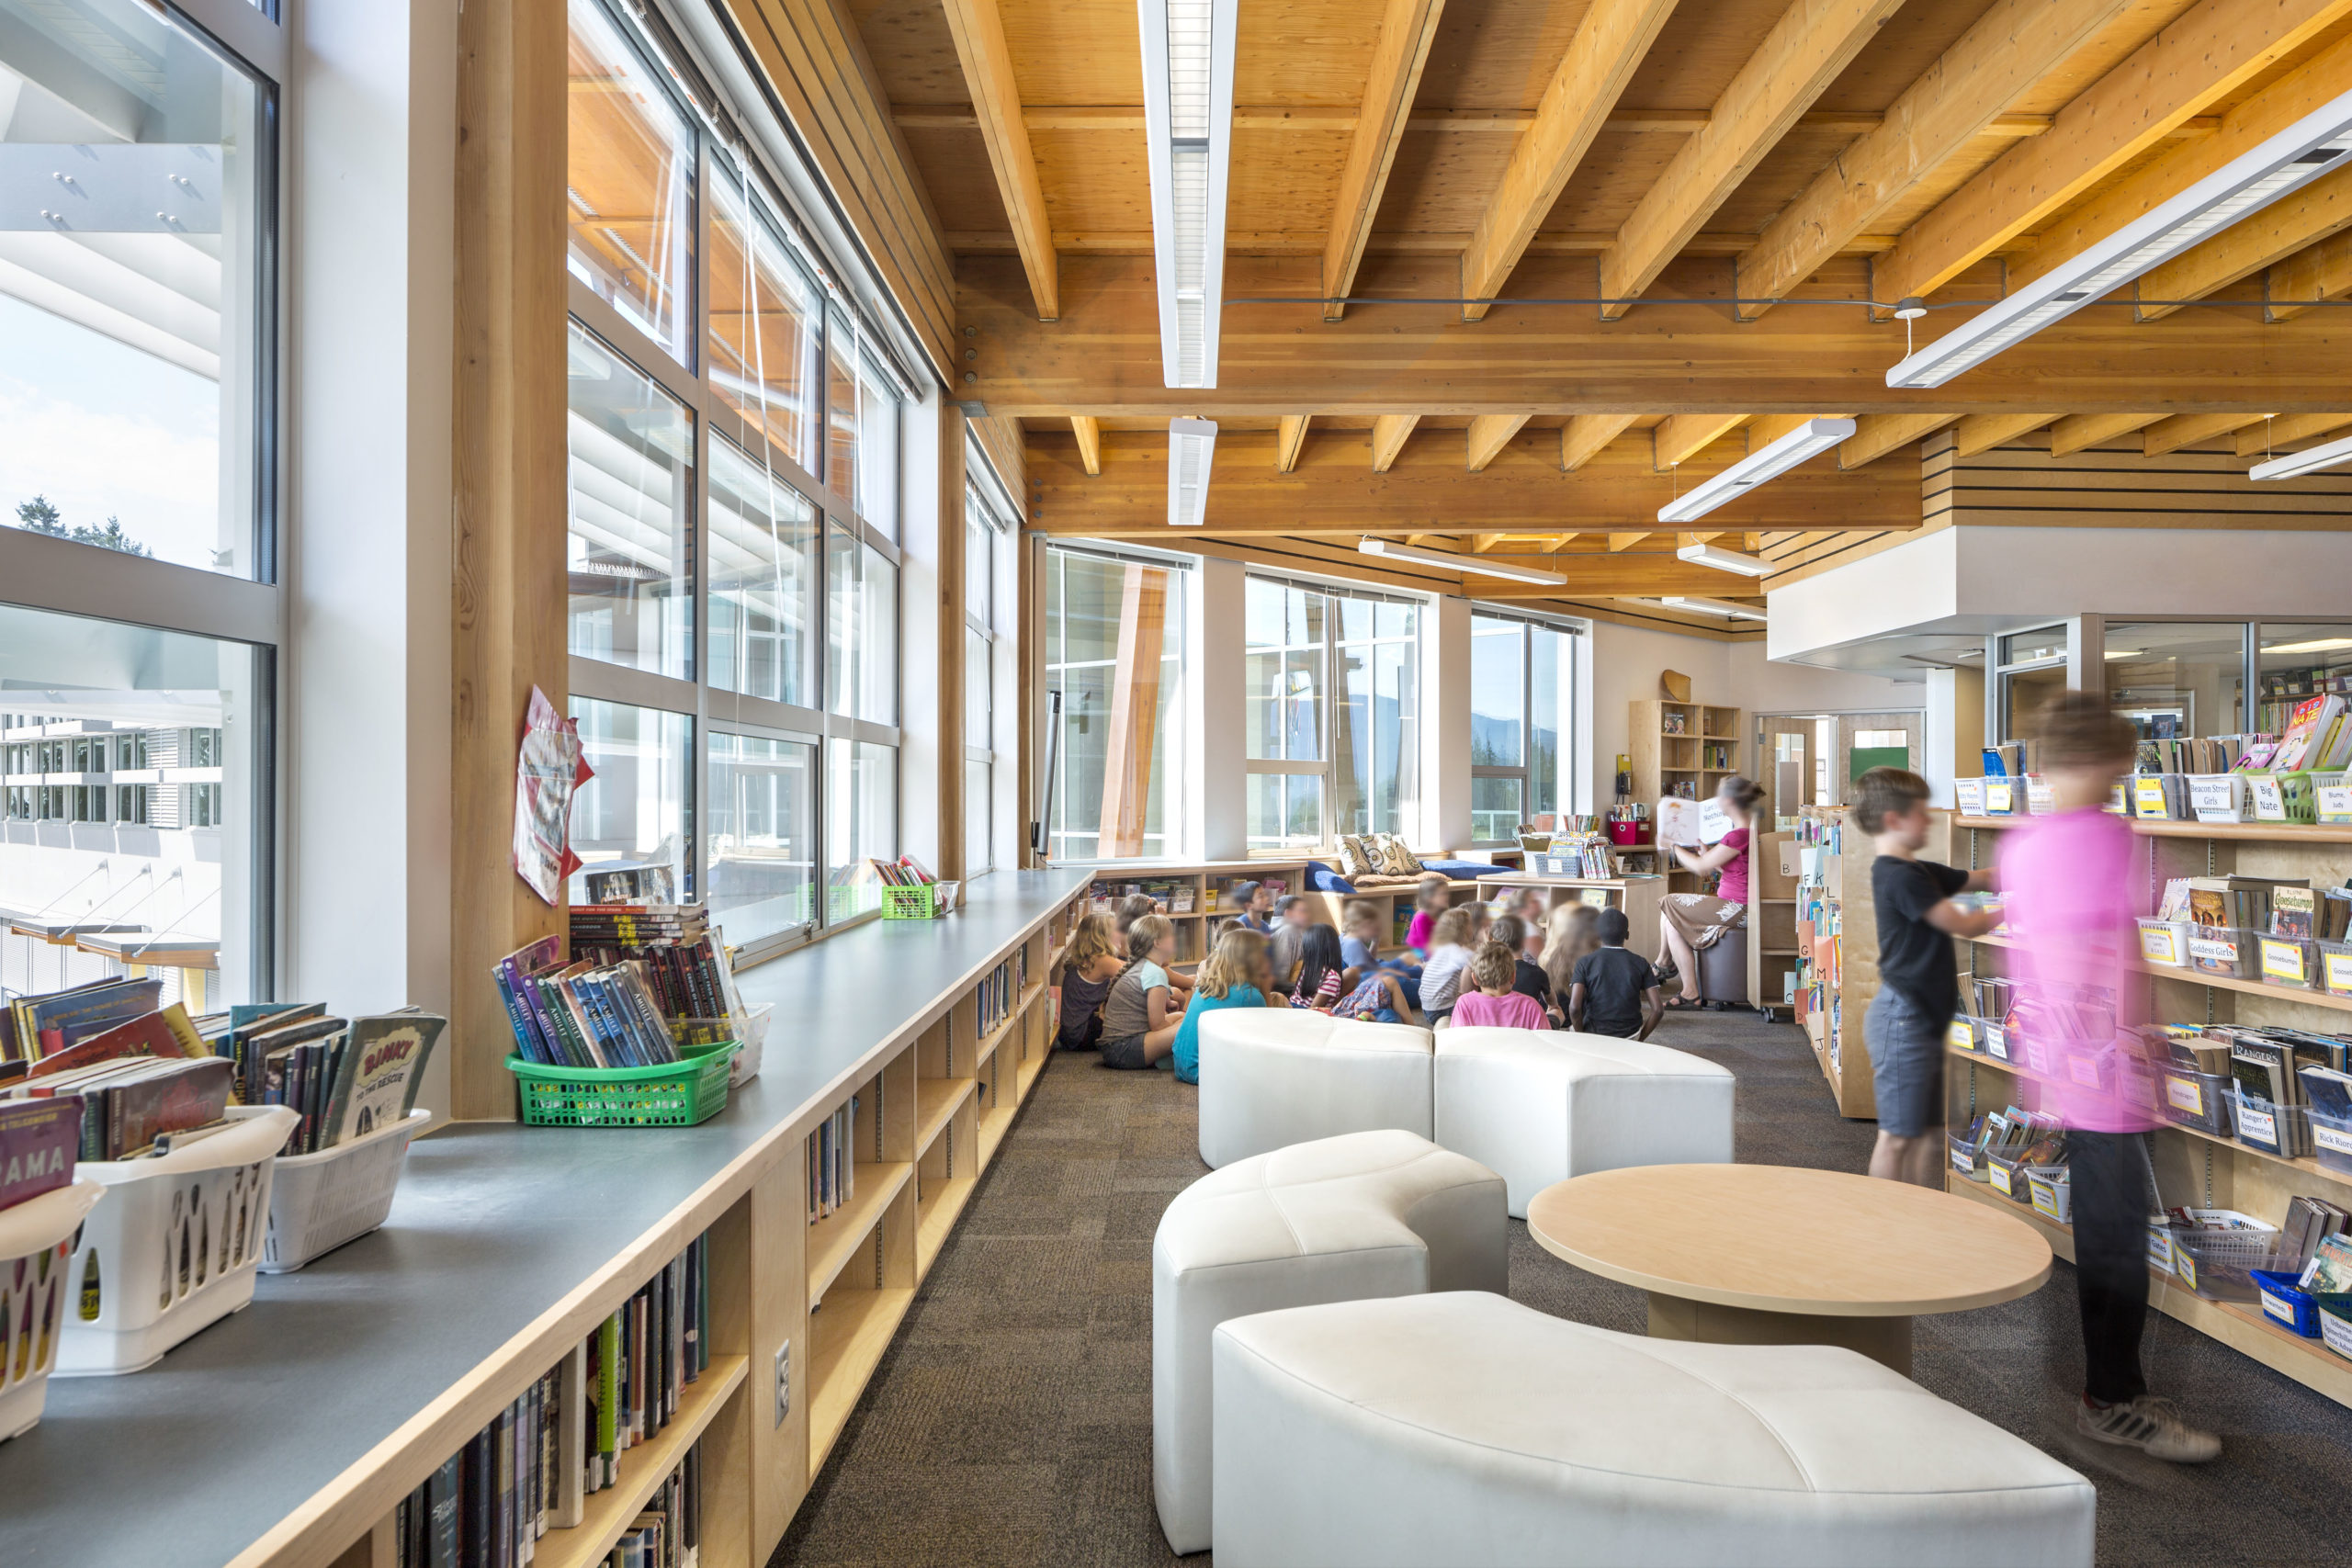 Interior view of elementary school library with exposed wood beams in ceiling, windows across most walls, and kids grouped on the floor listening to an instructor with a book.